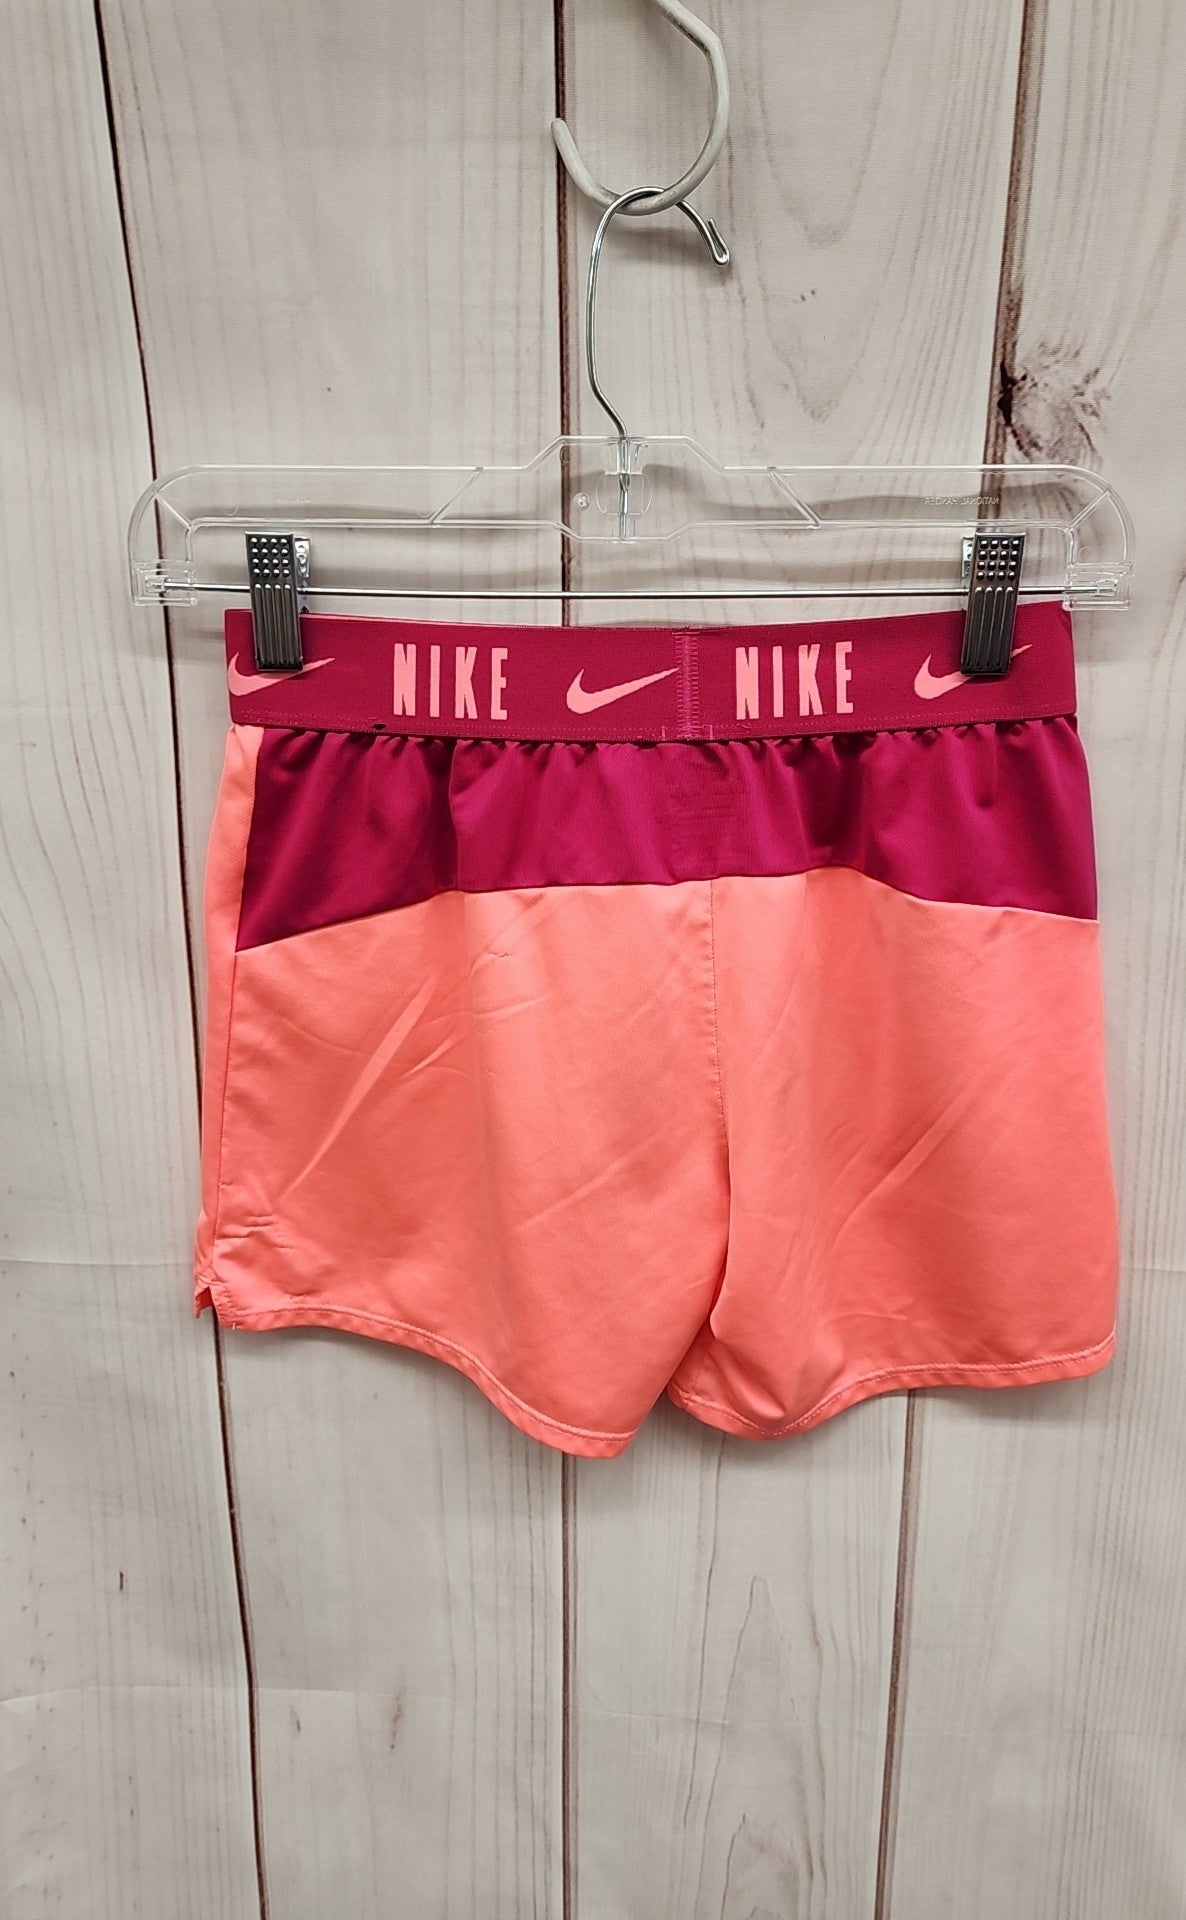 Nike Women's Size M Pink Active Shorts